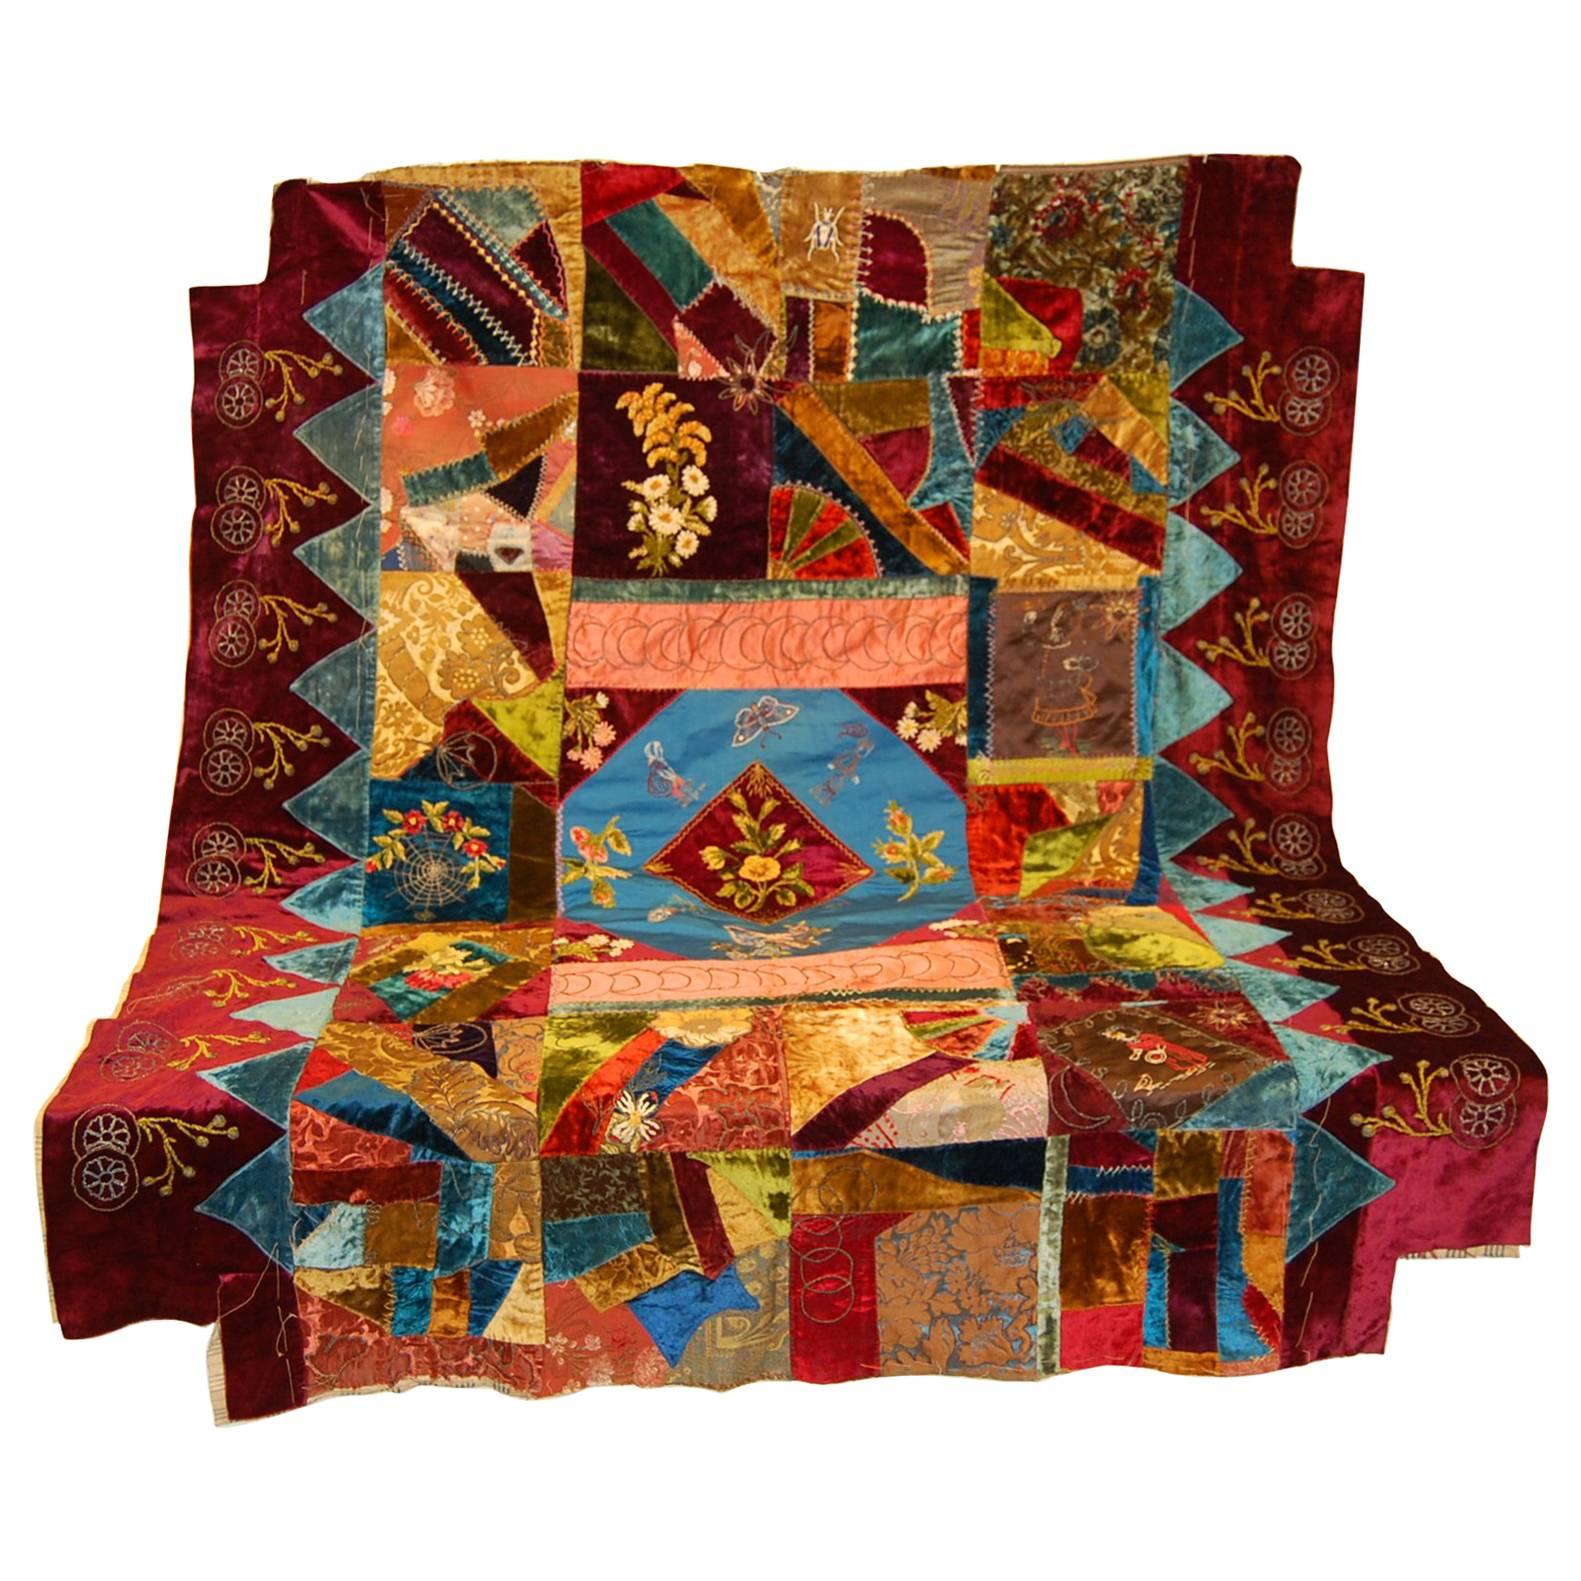 Silk Crazy Quilt Dated 1888, American